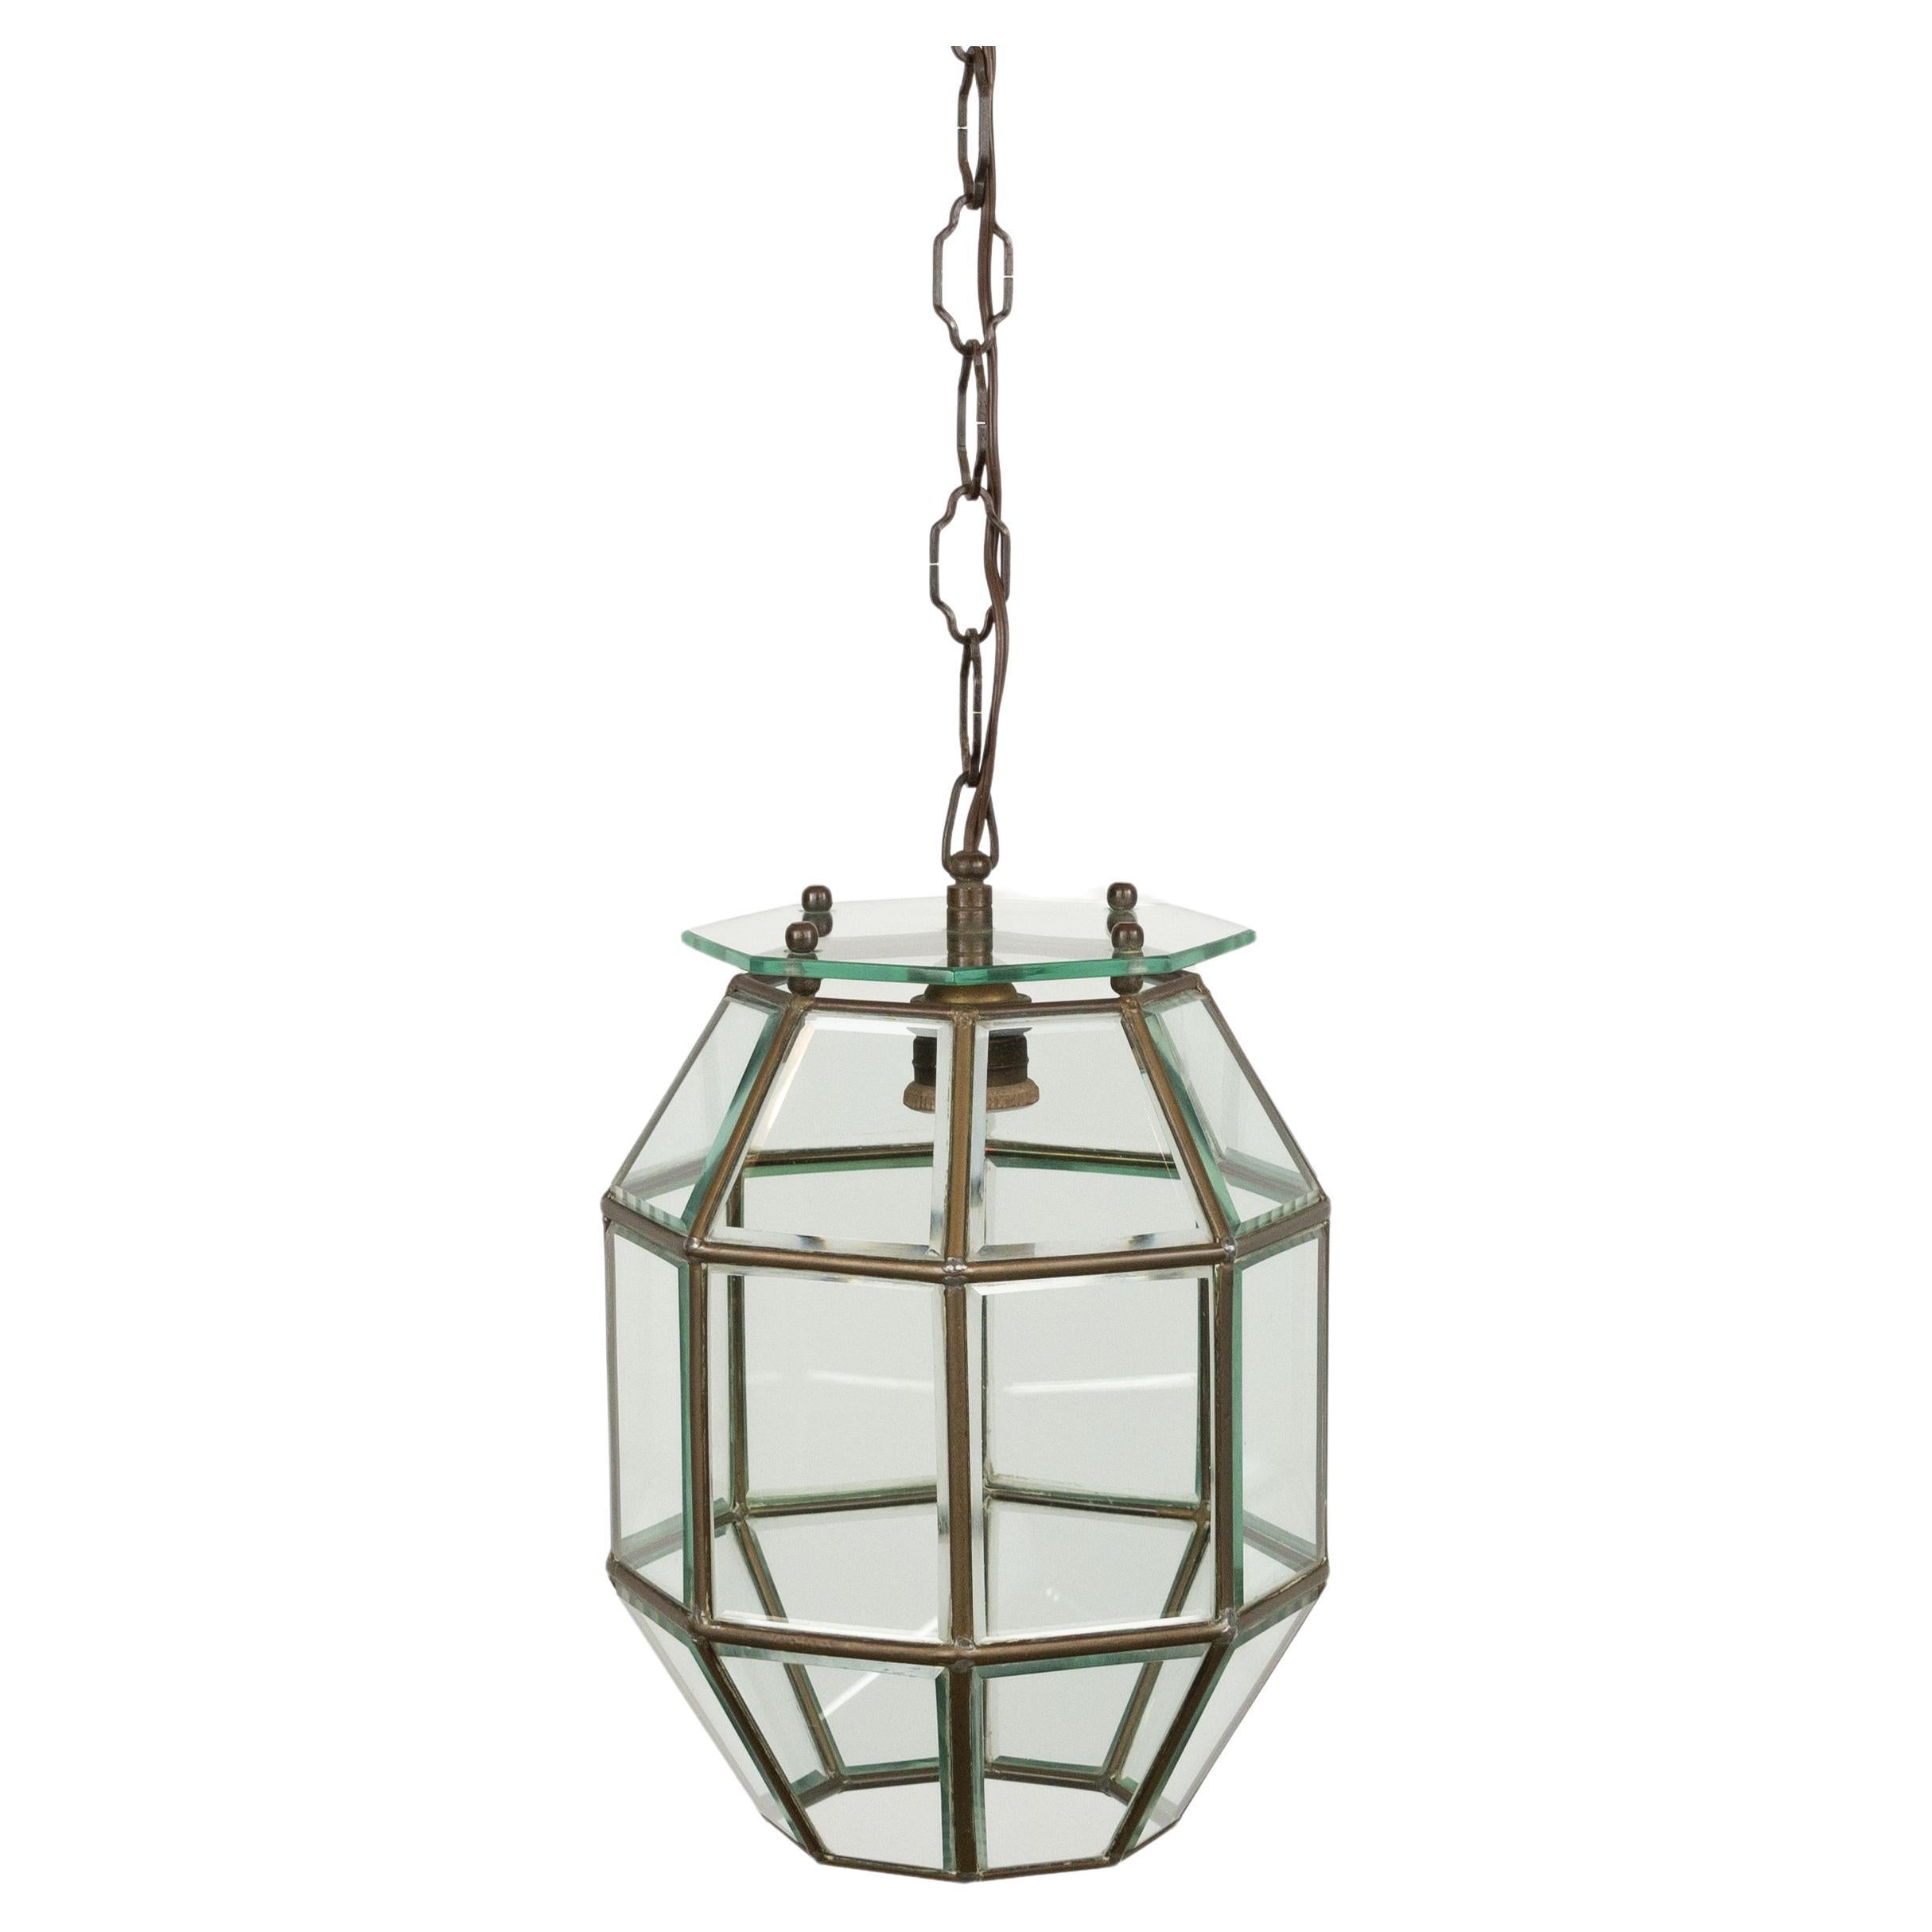 Mid-20th Century Chandelier Lantern in Brass and Beveled Glass Adolf Loos Style, Italy 1950s For Sale